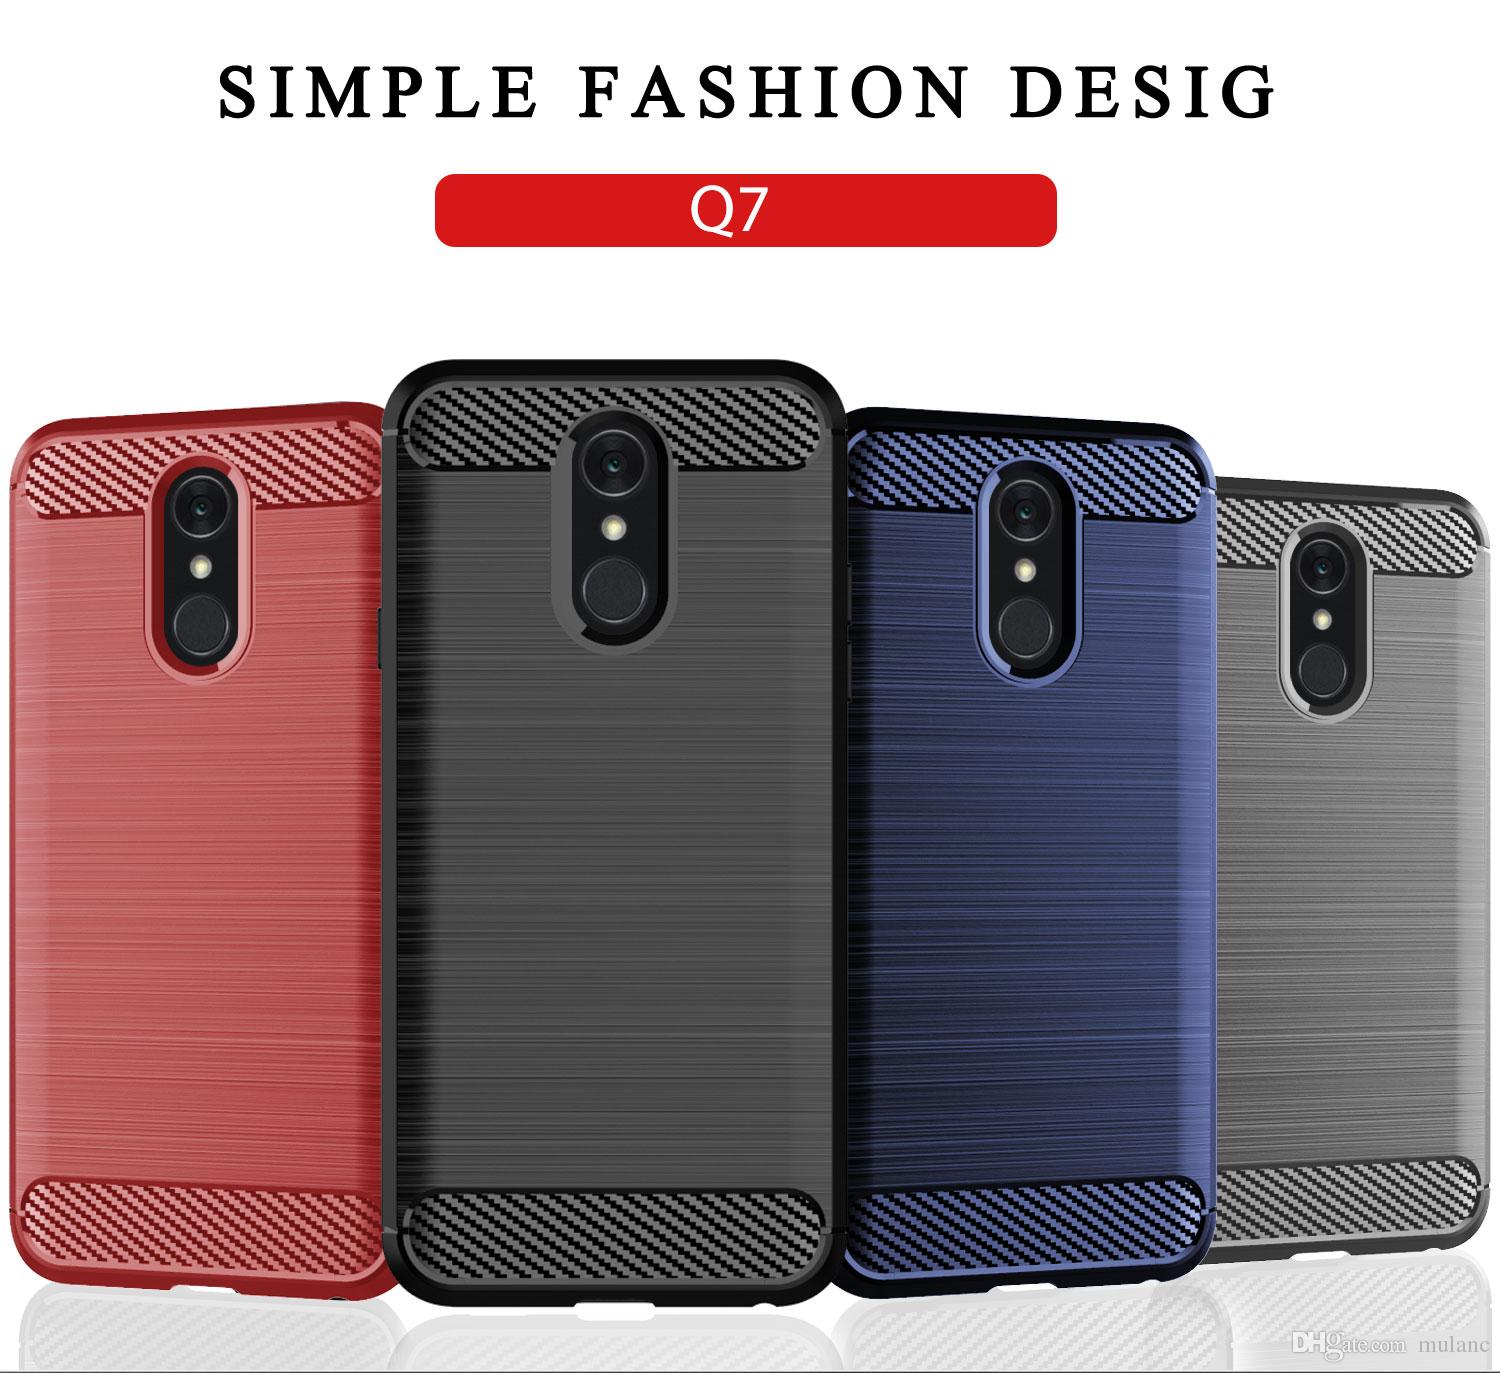 Soft Phone Case For LG Rebel 4 V40 V35 ThinQ Stylo4 Zone4 Xpression Plus Signature Edition 2018 All Models phone cover Classic shell